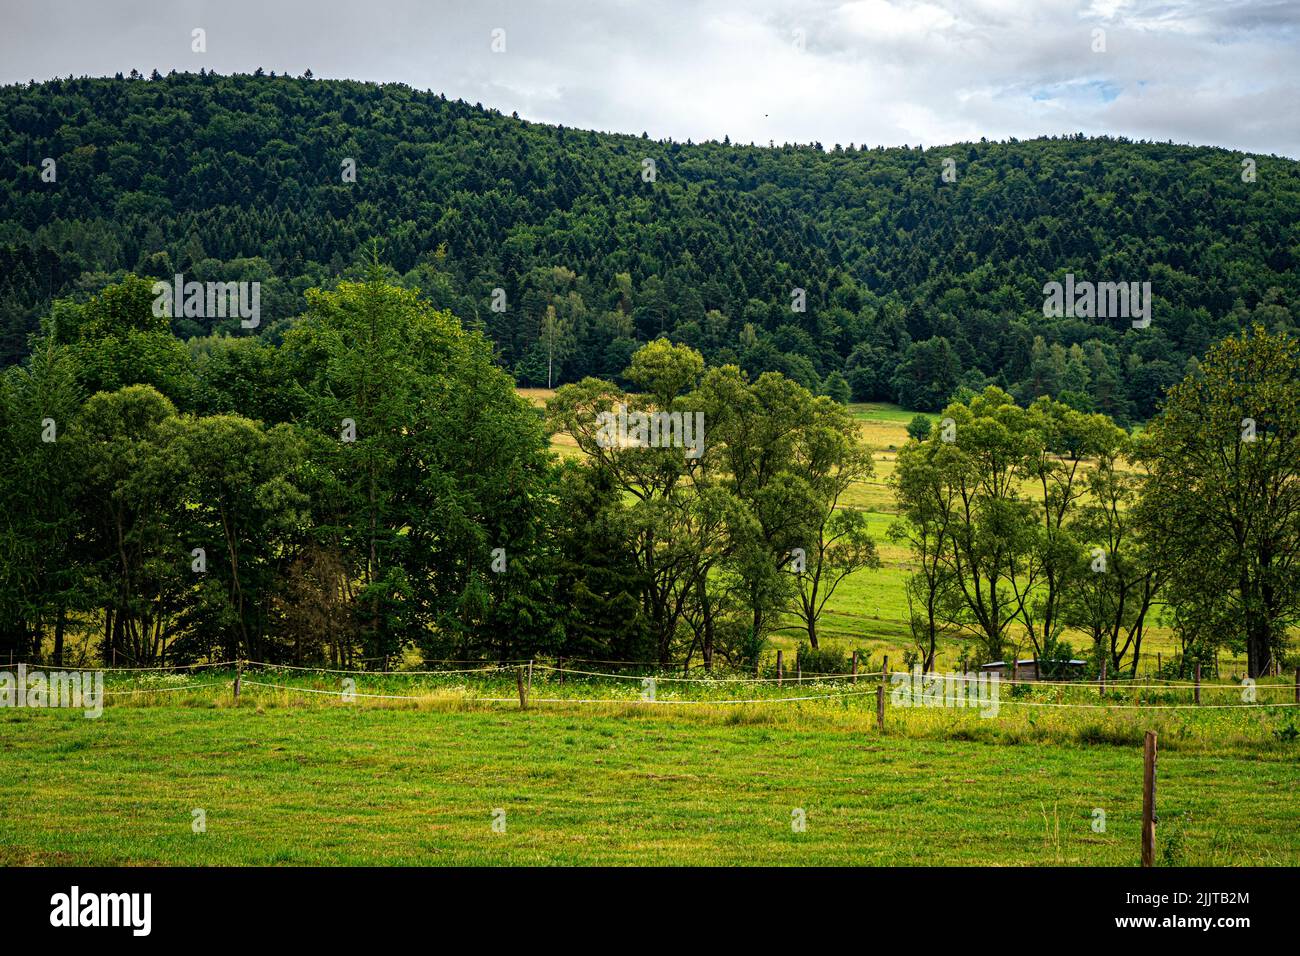 Green meadows and pastures shrouded in pine trees on the Beskids mountain ridges Stock Photo